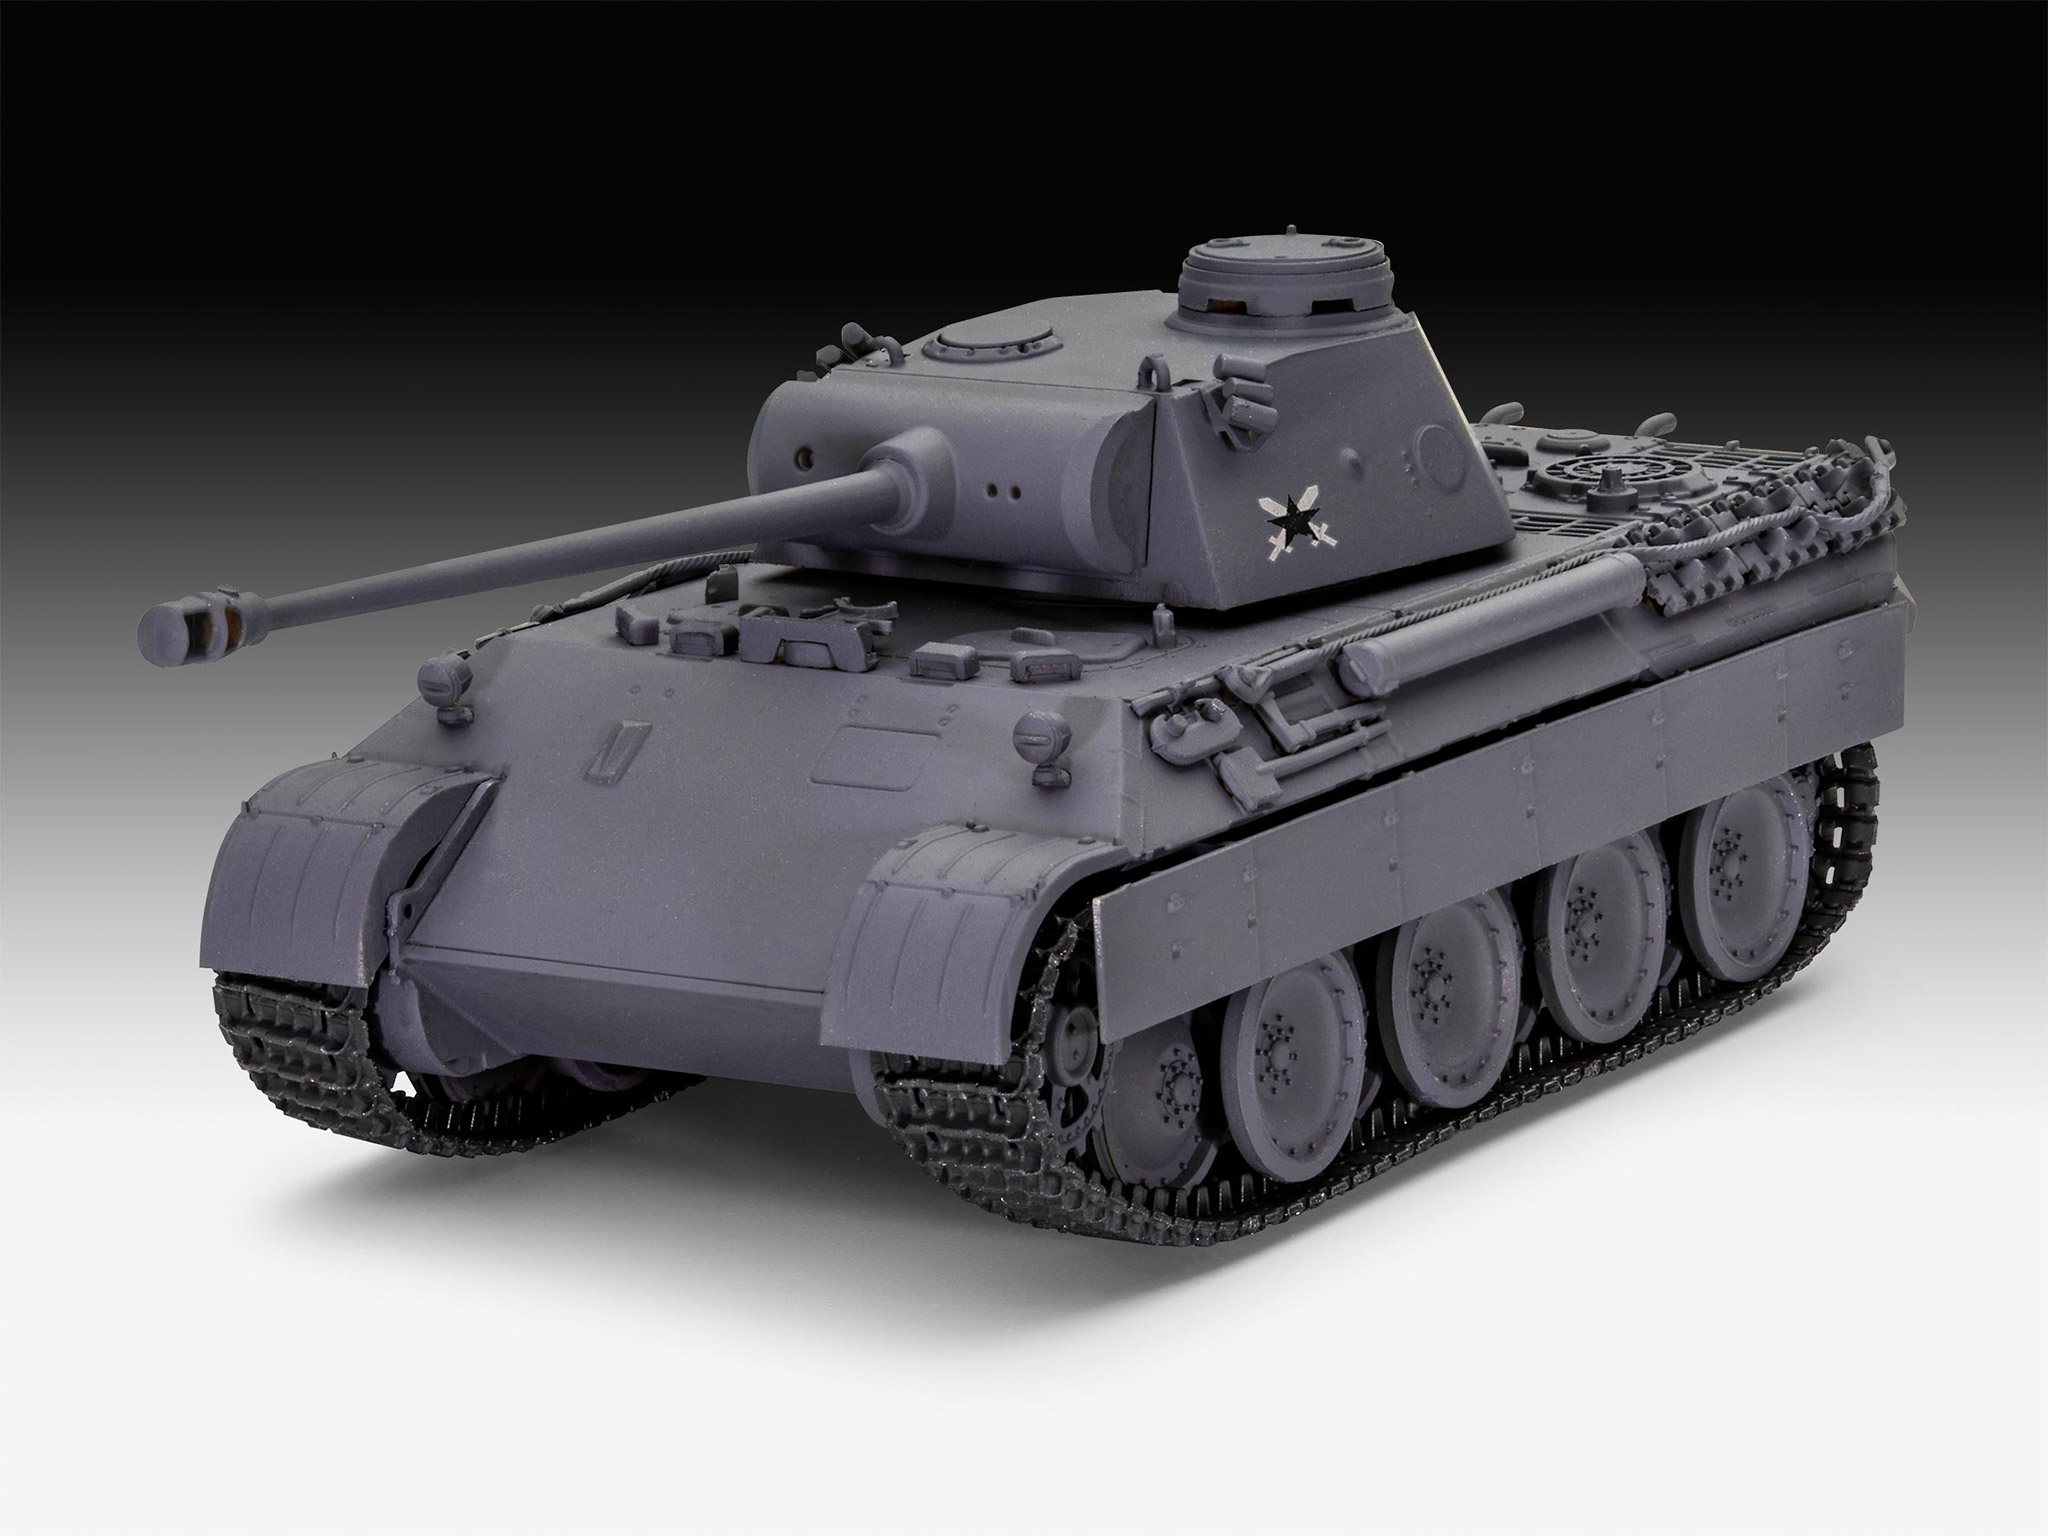 Revell 03509 Panther Ausf. D 